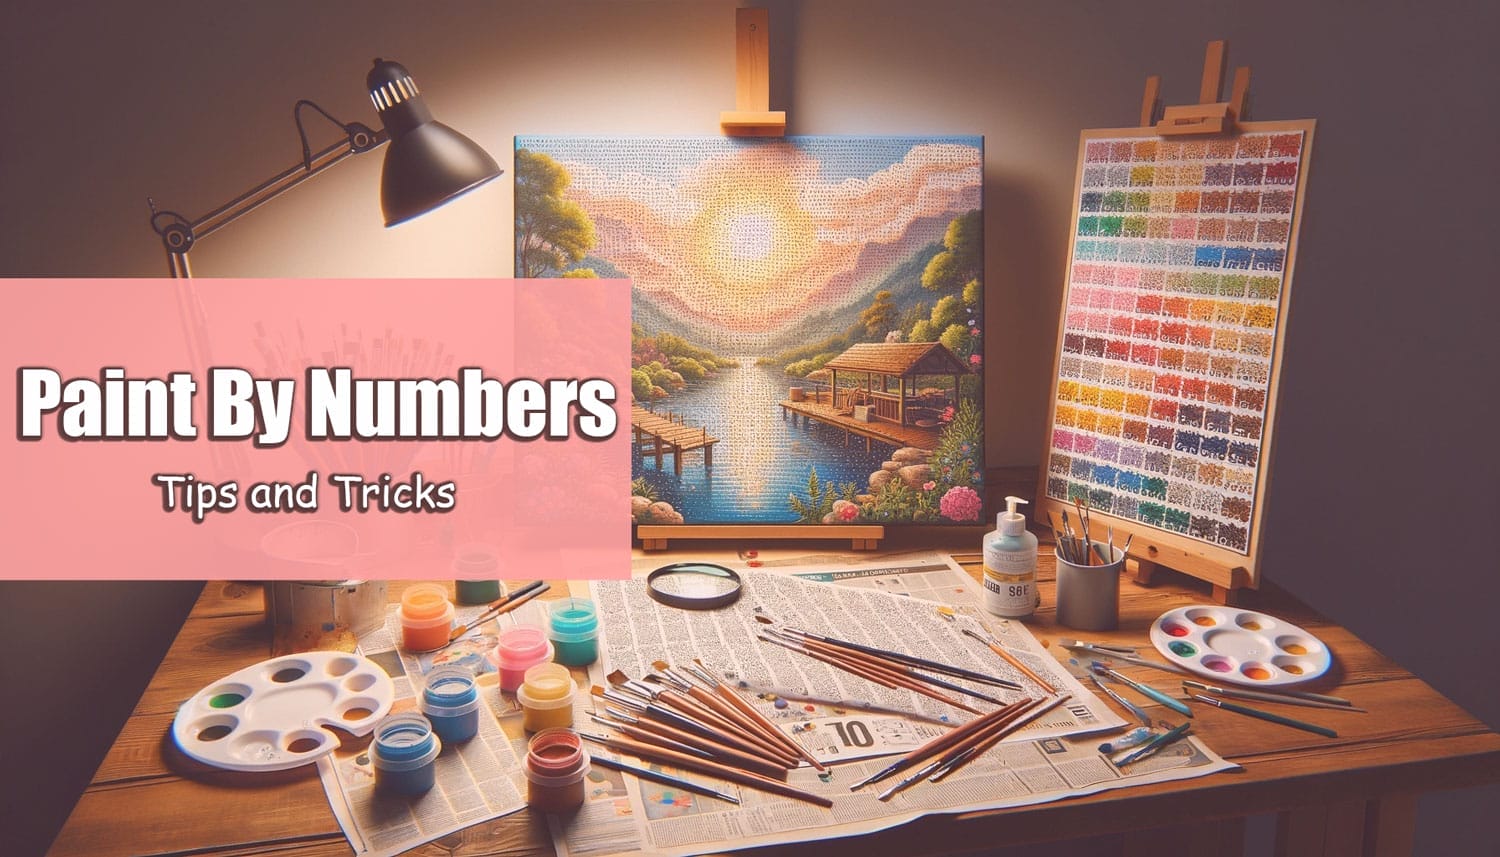 12 Paint By Number Tips: How To Make A Painting Look Better & More